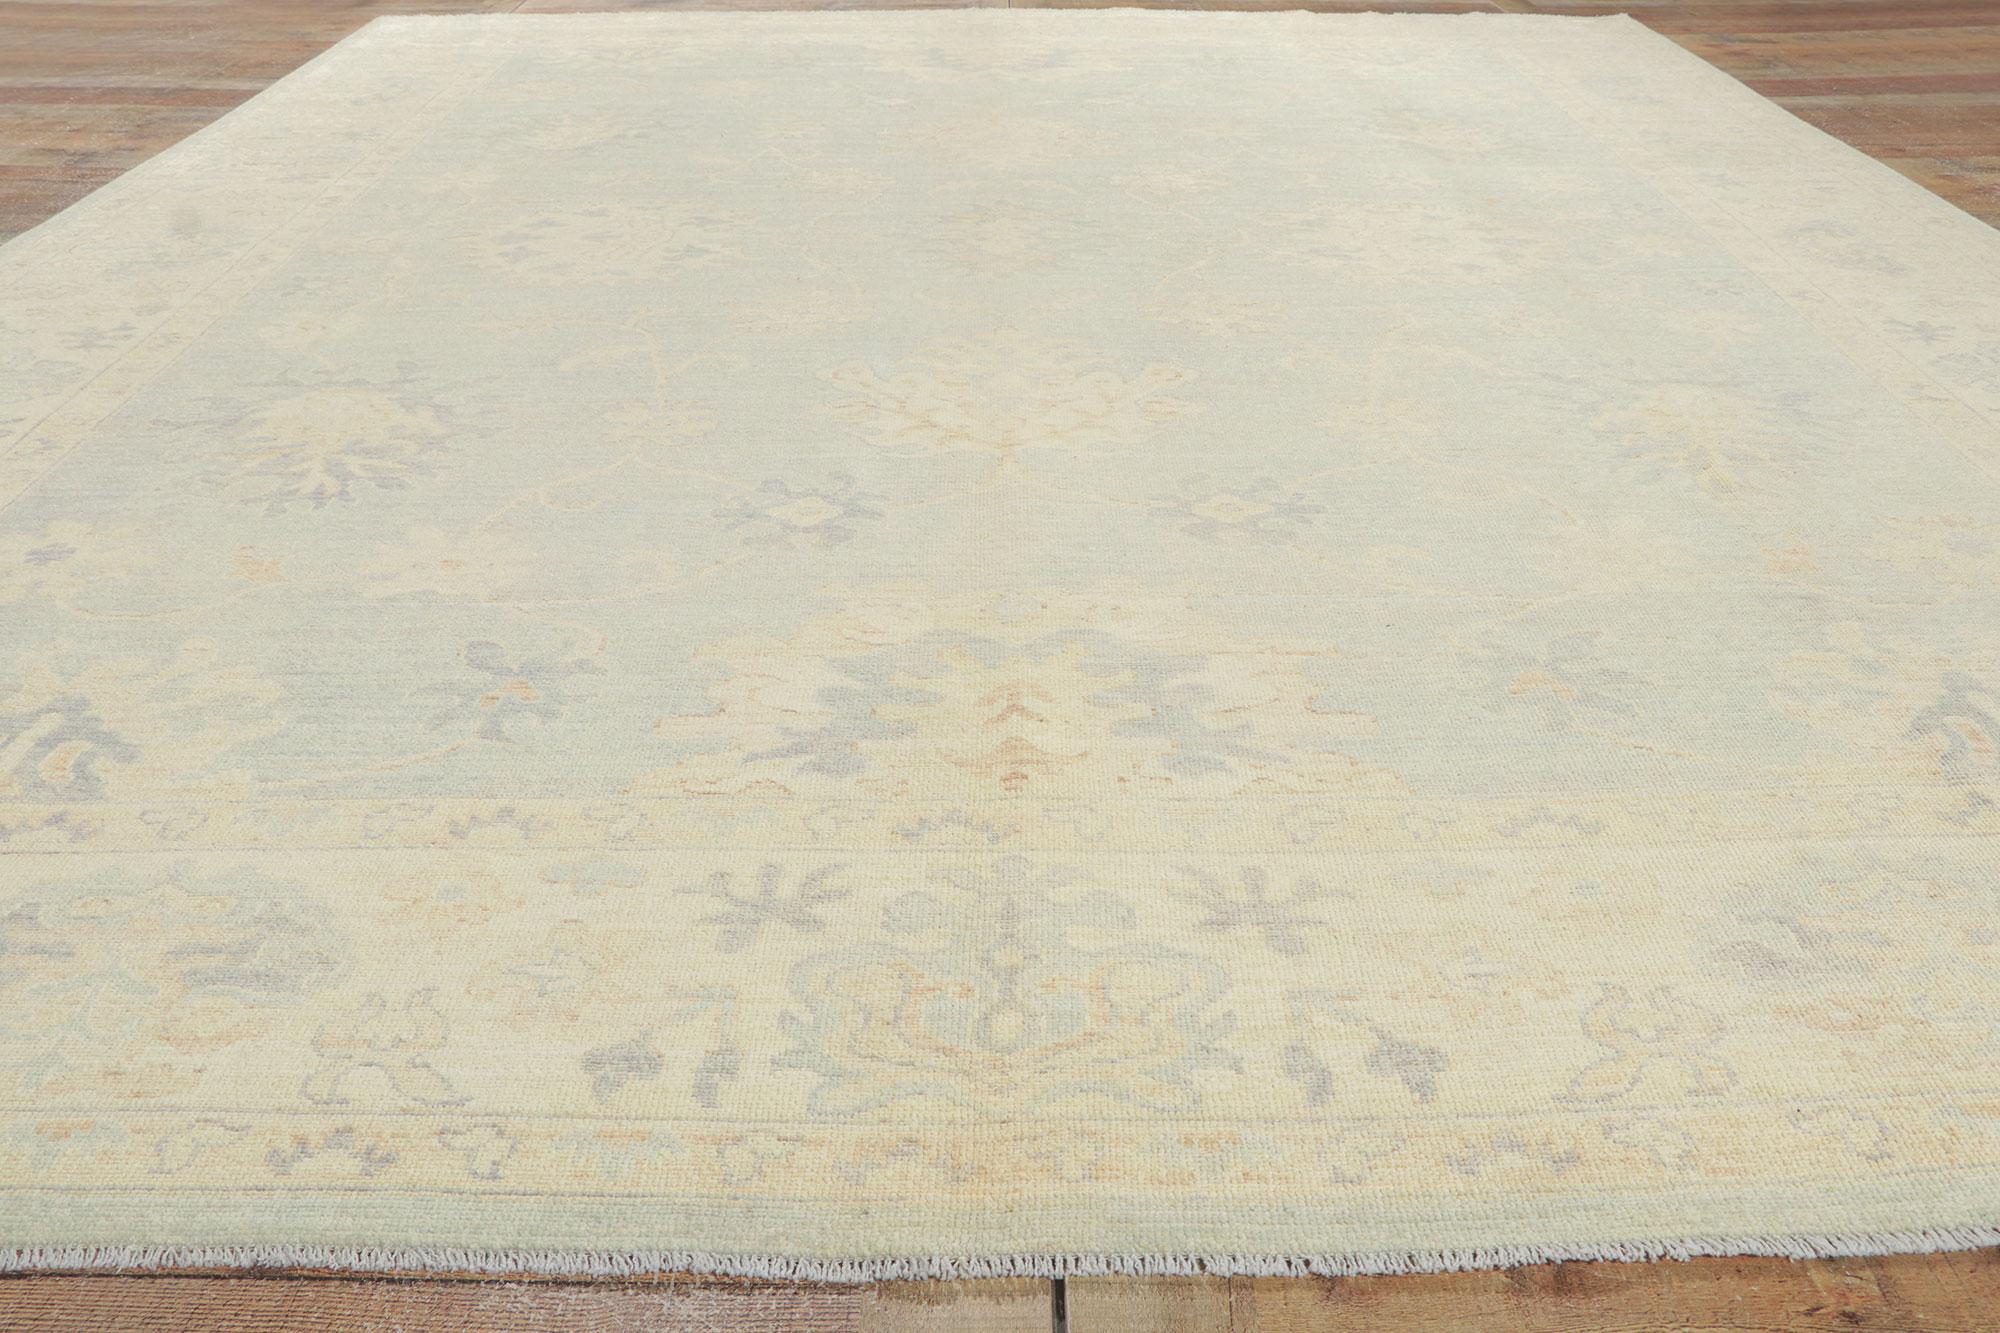 New Vintage-Inspired Oushak Rug with Light and Airy Color Palette For Sale 1